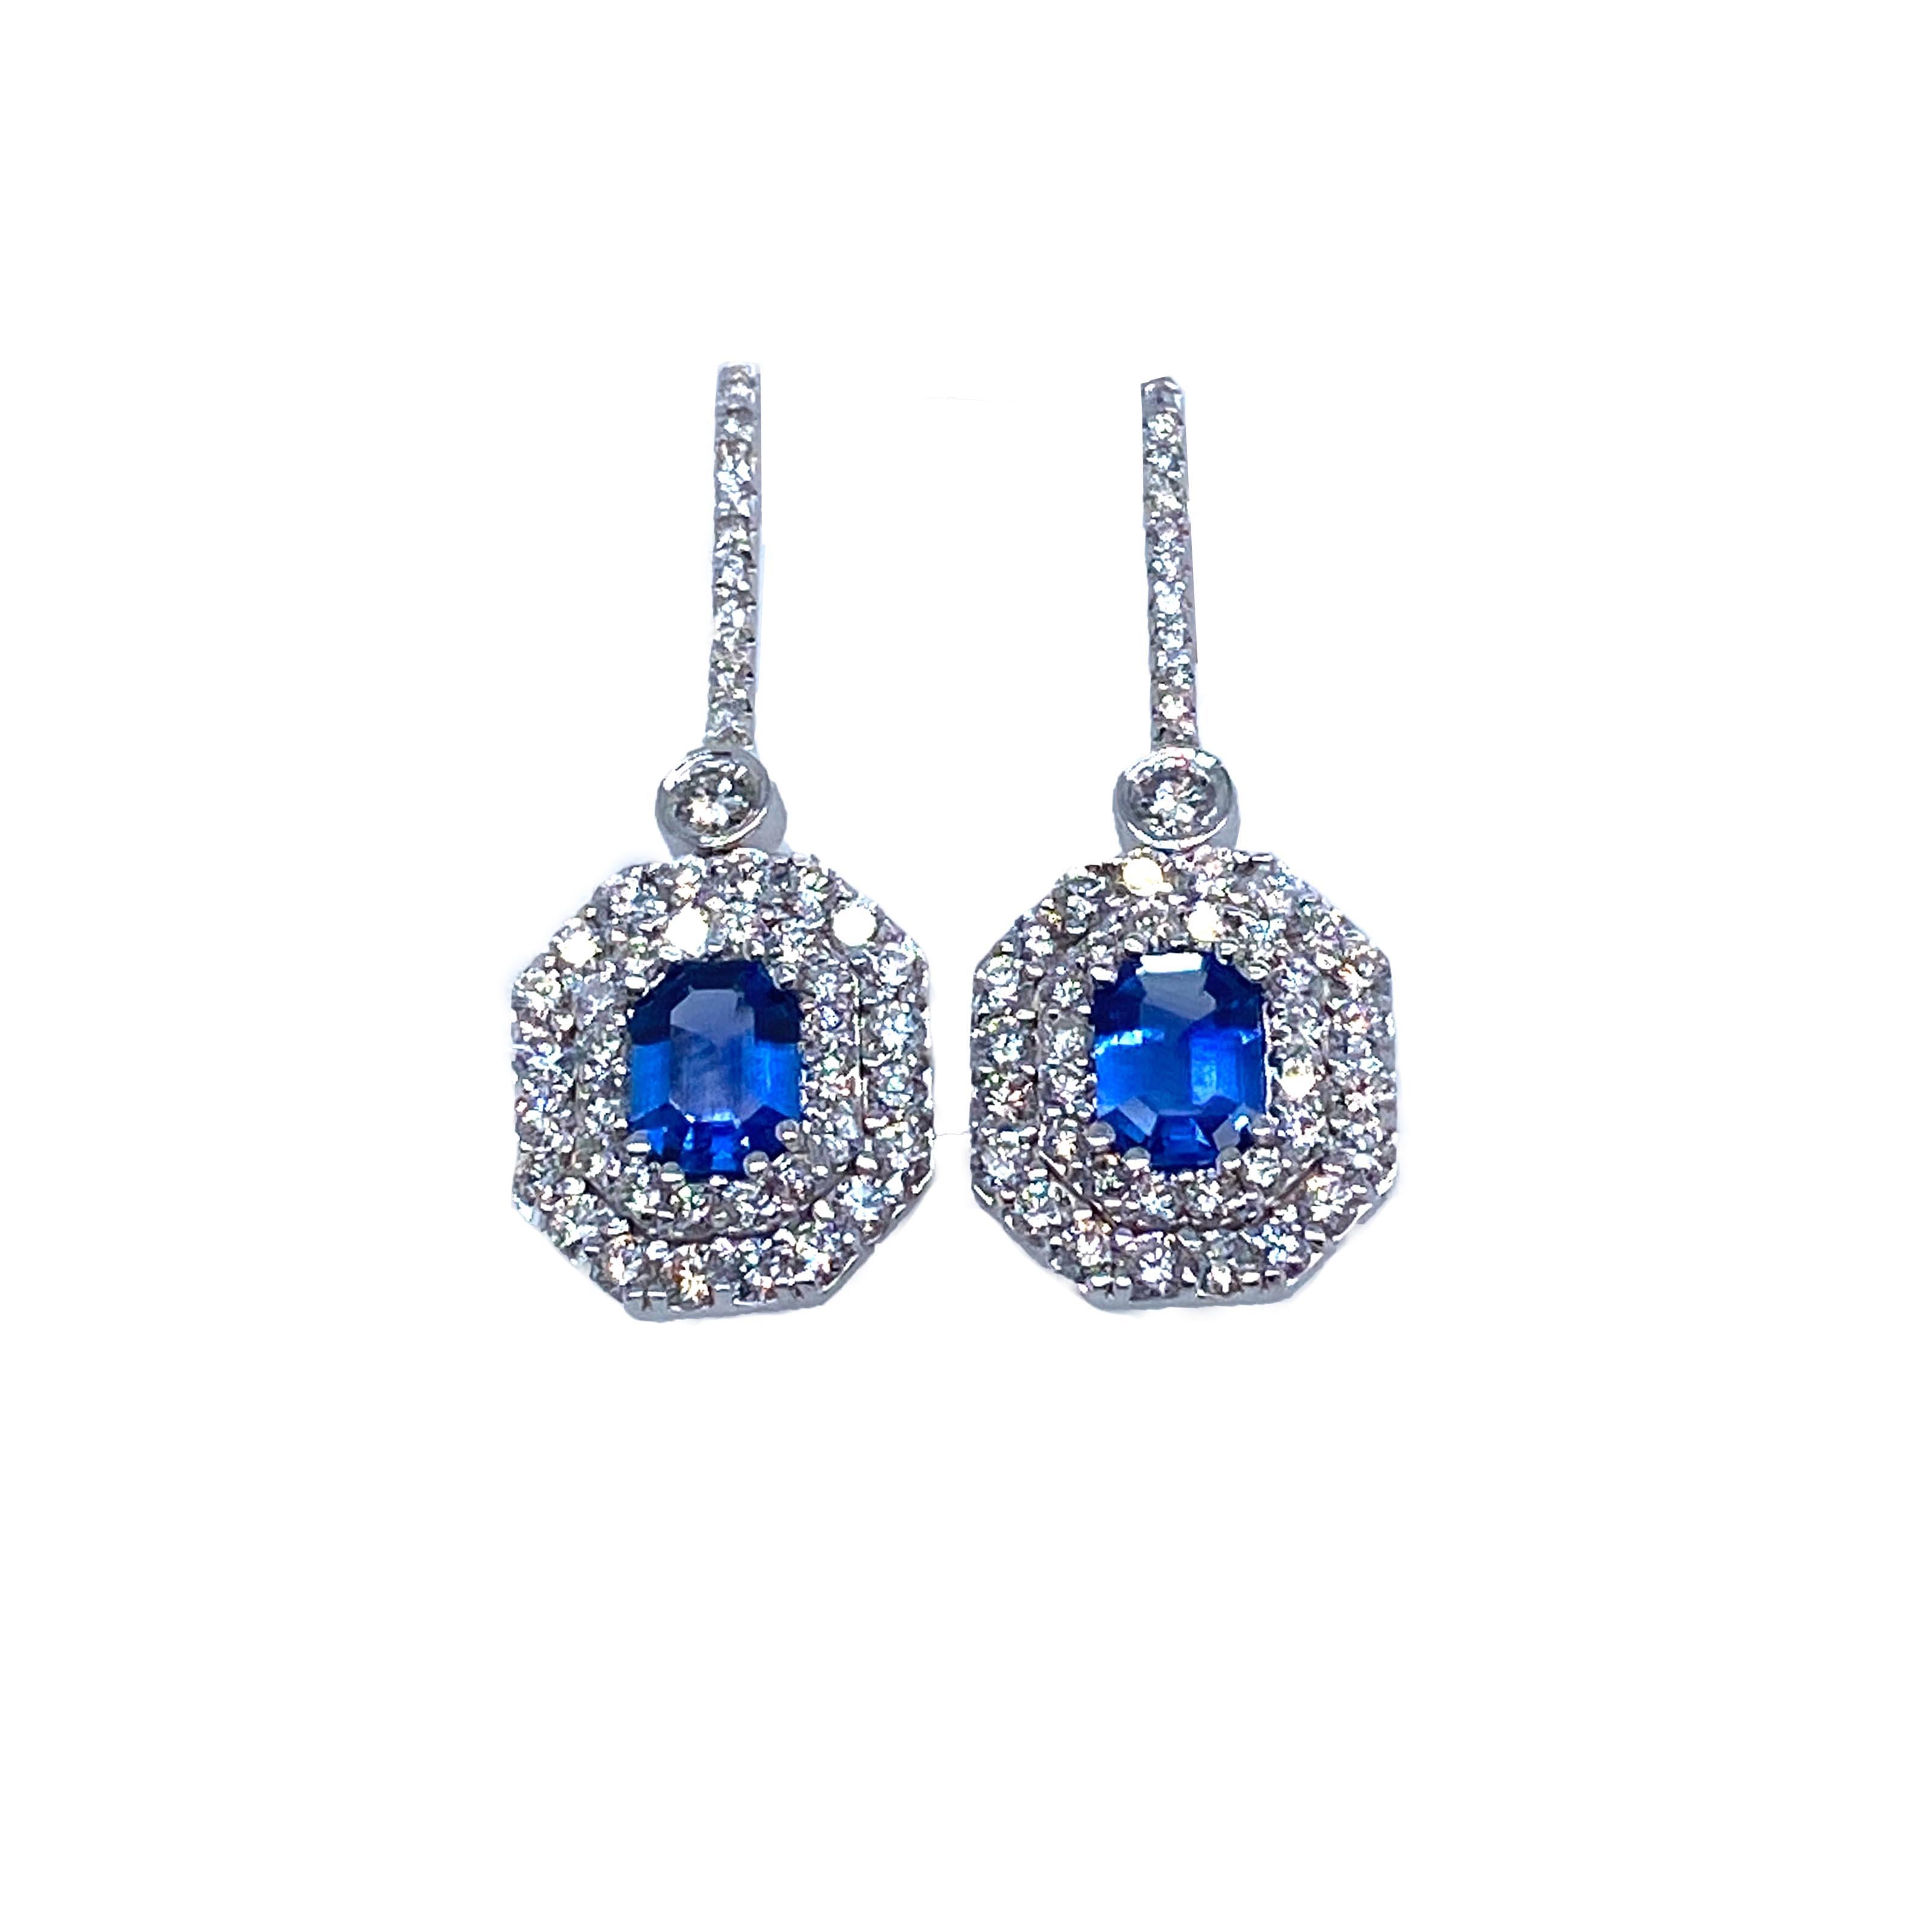 Offered here is a classic look sapphire & diamonds earring set in 18kt white gold. The earrings measure about 1.25” long and about 0.50” on the widest part. The earrings weigh 7.6 grams. The earrings are not marked, but tested with acid on black